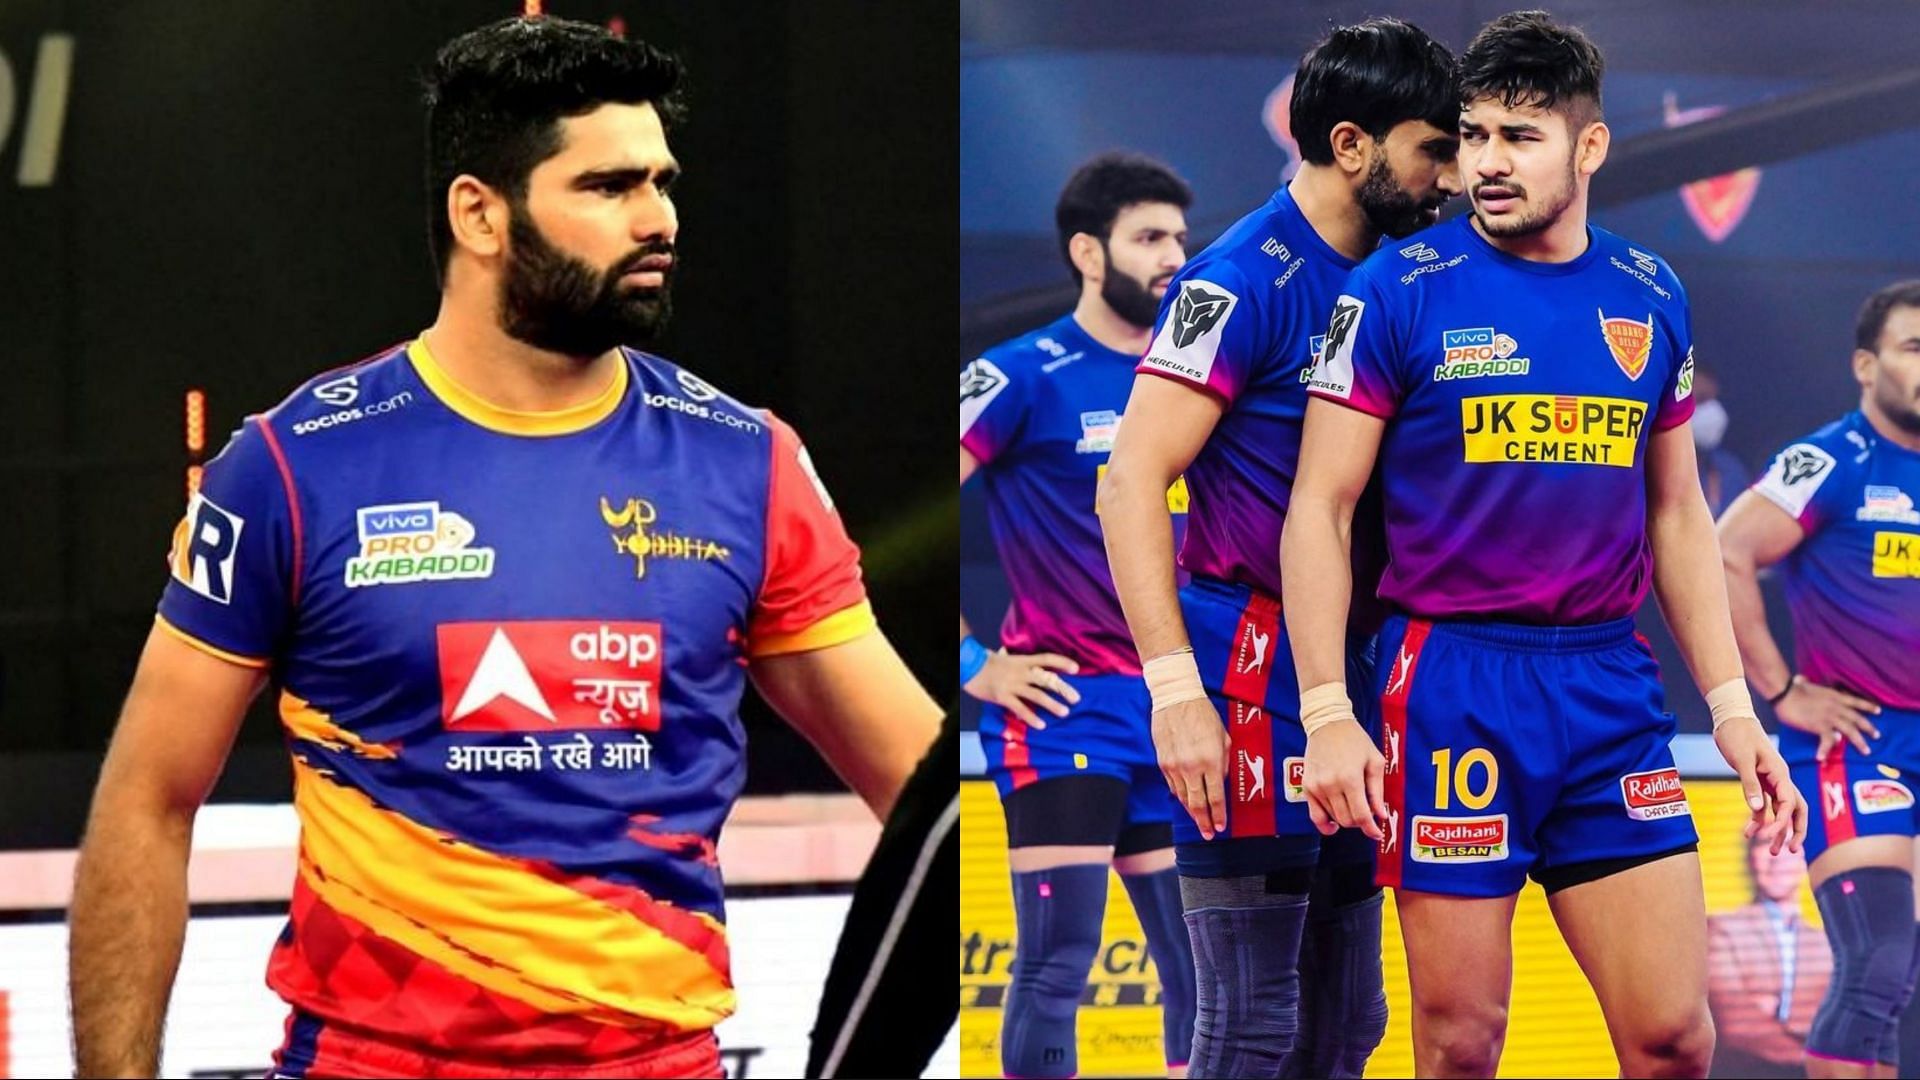 Pardeep Narwal (L) is currently the No. 1 raider, but Naveen Kumar (R) has a chance of overtaking him (Image Source: Instagram)